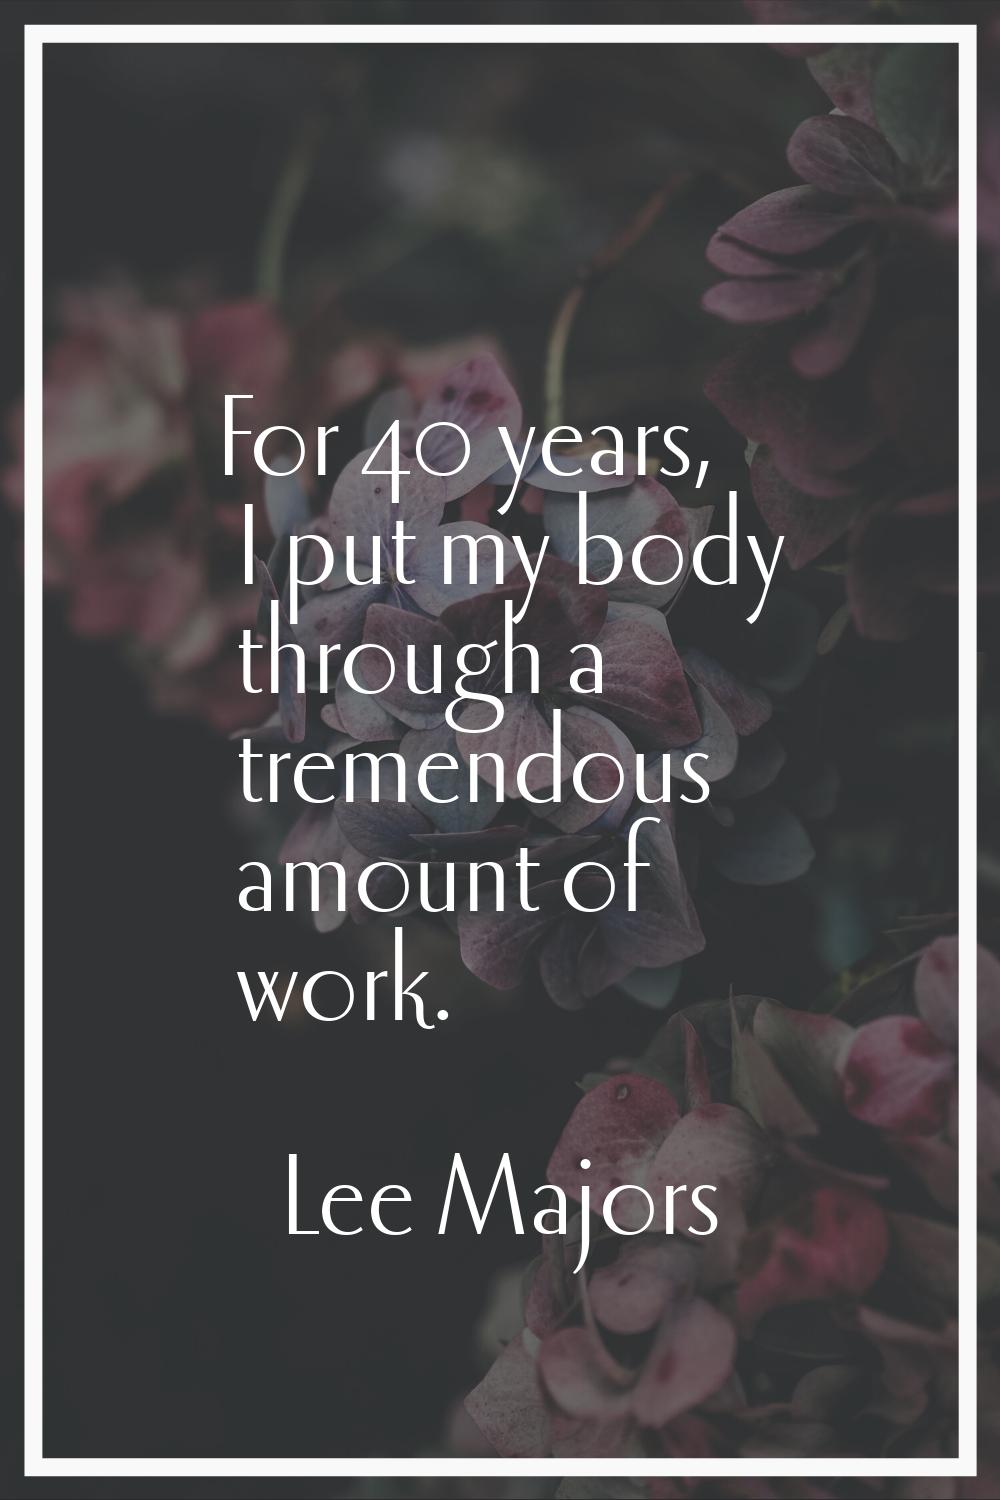 For 40 years, I put my body through a tremendous amount of work.